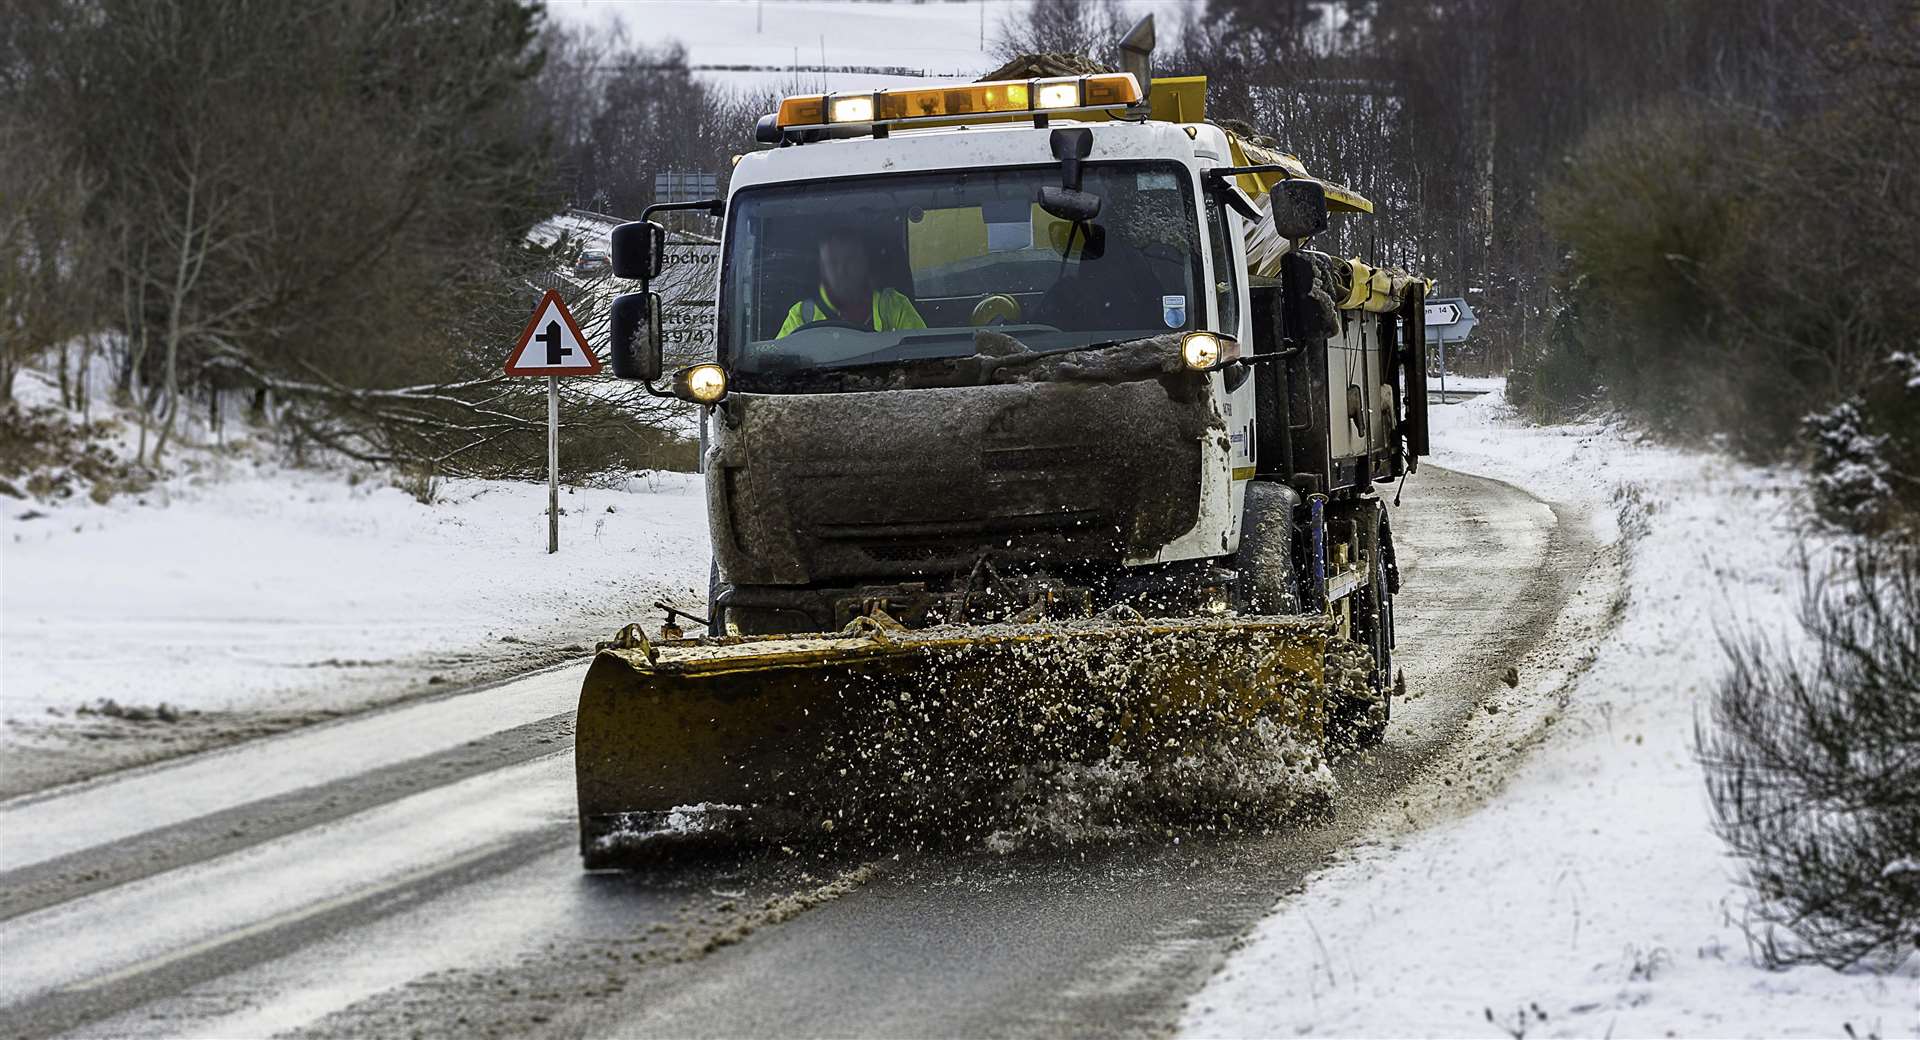 With cold weather forecasted gritters will be out in Aberdeenshire.